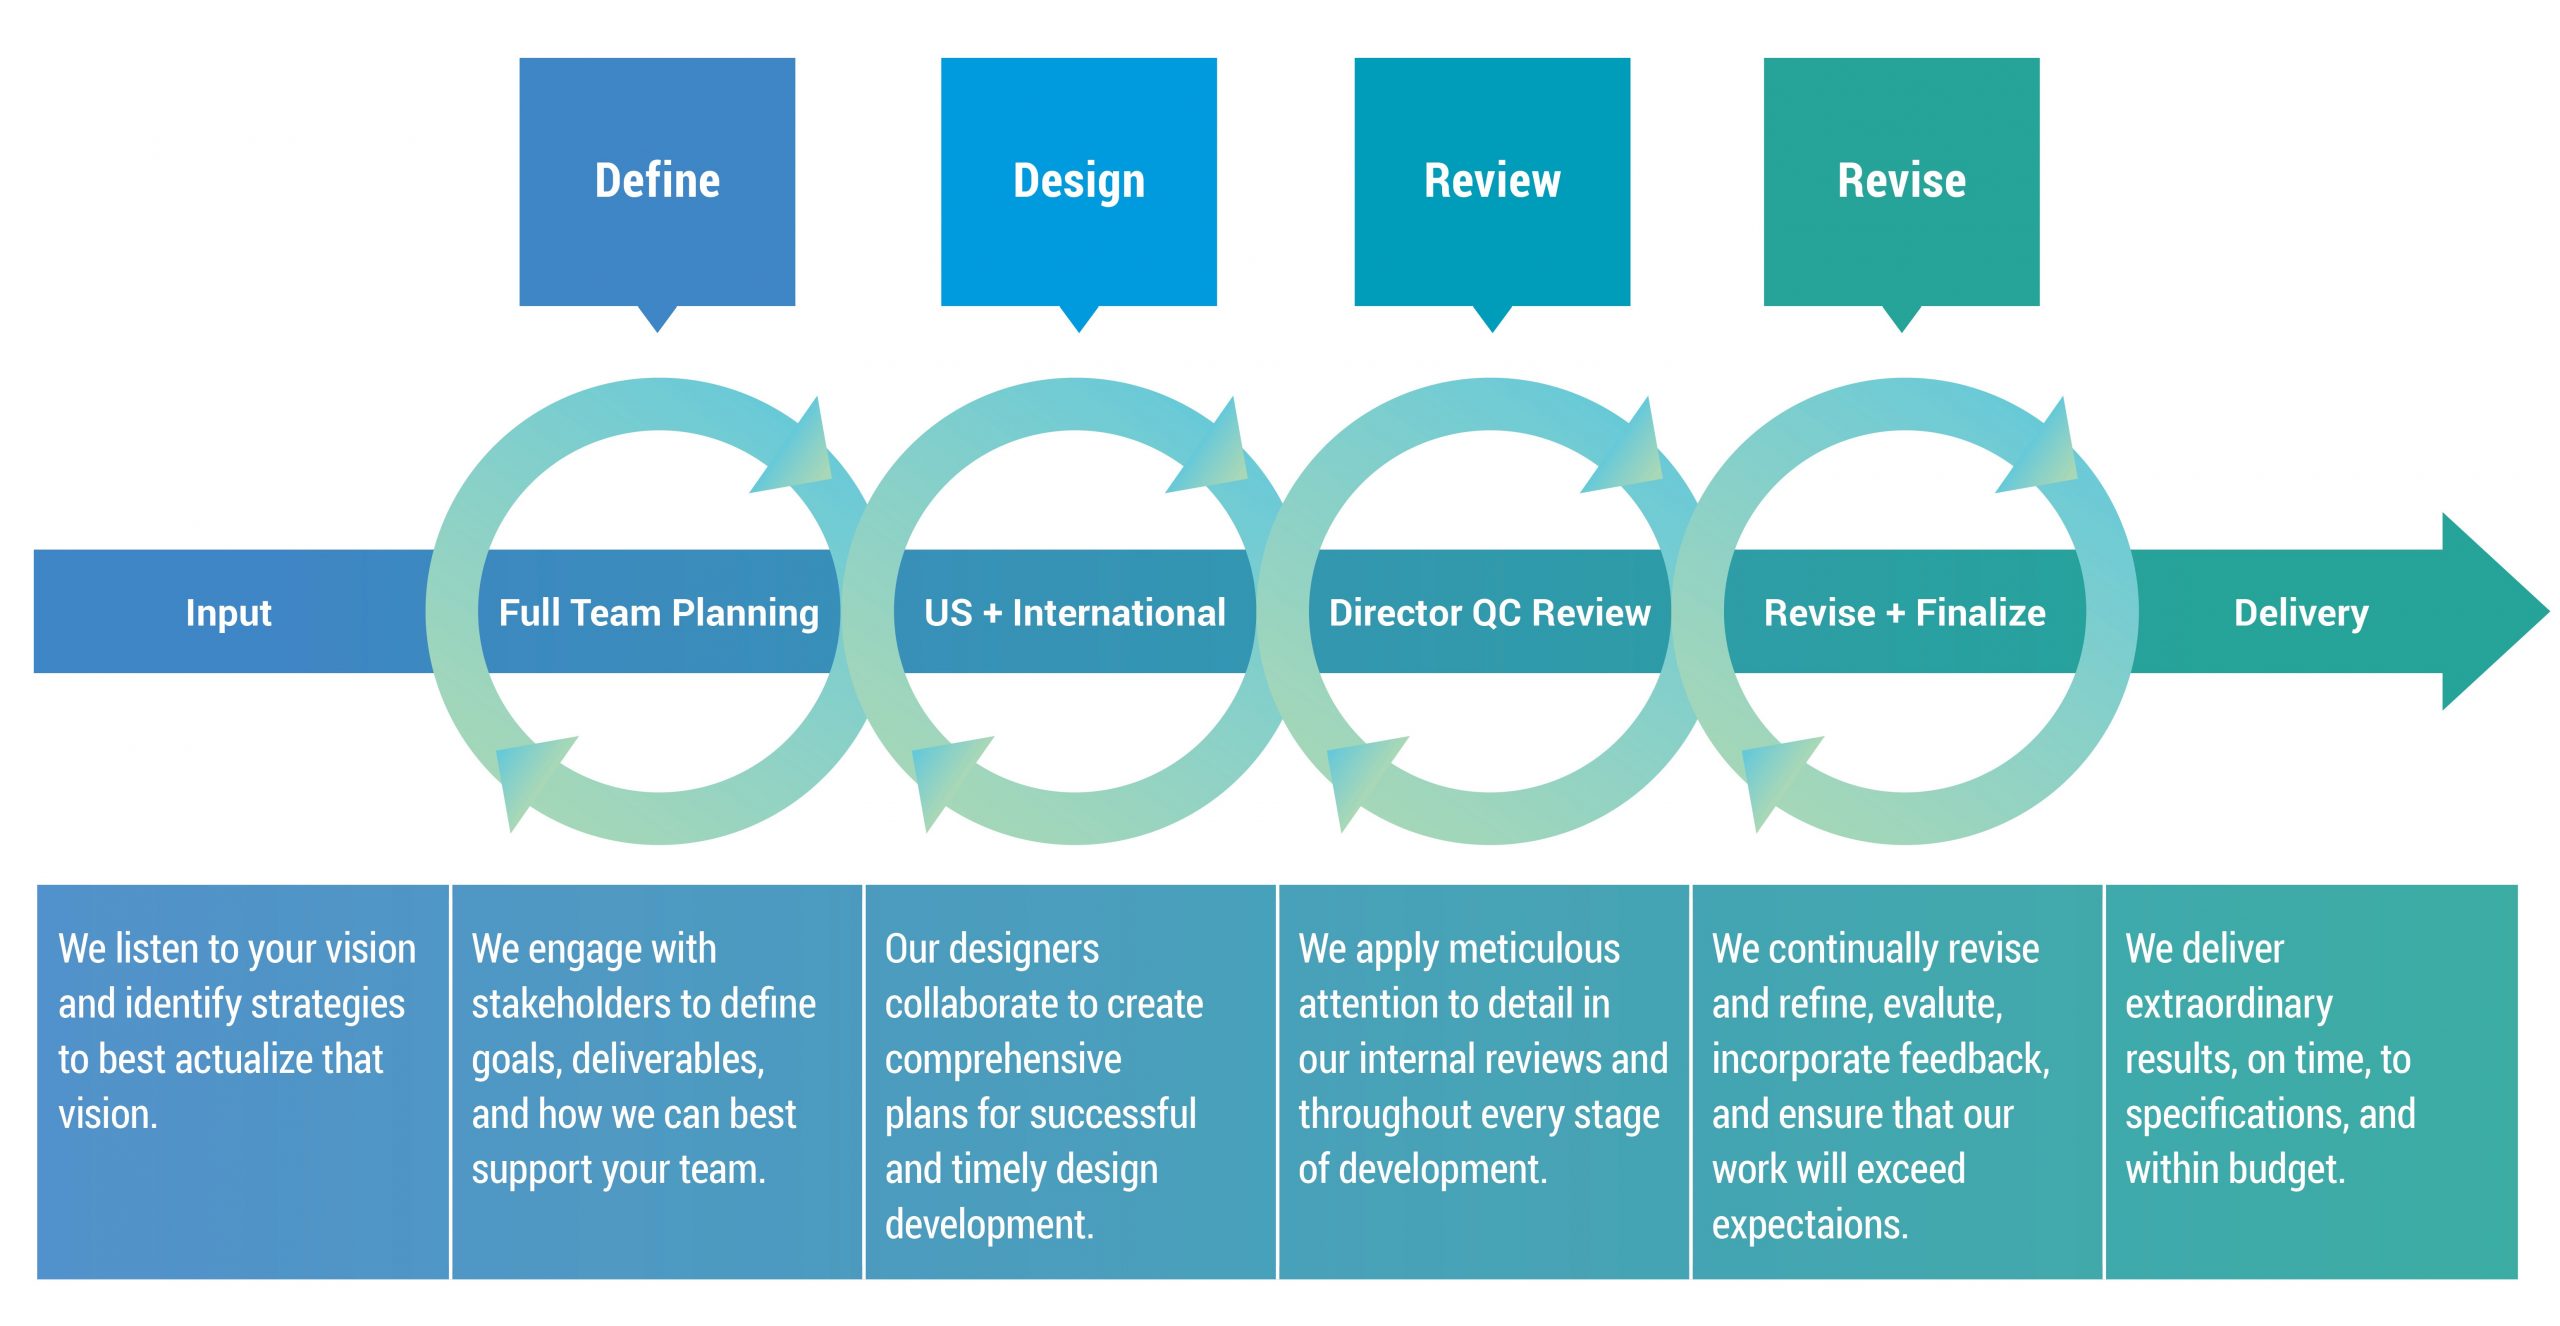 Four boxes at the top entitled define, design, review, and revise. Below that is an arrow to the right that begins with input and ends with delivery. In between and on the arrow, under the define box, is full team planning with an encased circular arrow. Under the design box is U.S. plus international with an encased circular arrow. Below the review box is director QC review with an encased circular arrow. Below the revise box is revise plus finalize with an encased circular arrow. Below the arrow are six boxes. The first sits under input and states that we listen to your vision and identify strategies to best actualize that vision. The second one is under full team planning that states we engage with stakeholders to define goals, deliverables, and how we can best support your team. The third one is under U.S. plus international that states our designers collaborate to create comprehensive plans for successful and timely design development. The fourth sits under director QC review and states we apply meticulous attention to detail in our internal reviews throughout every stage of development. The fifth sits under revise plus finalize and states we continually revise and refine, evaluate, incorporate feedback, and ensure that our work will exceed expectations. The sixth sits under delivery and states that we deliver extraordinary results, on time, to specifications, and within budget.